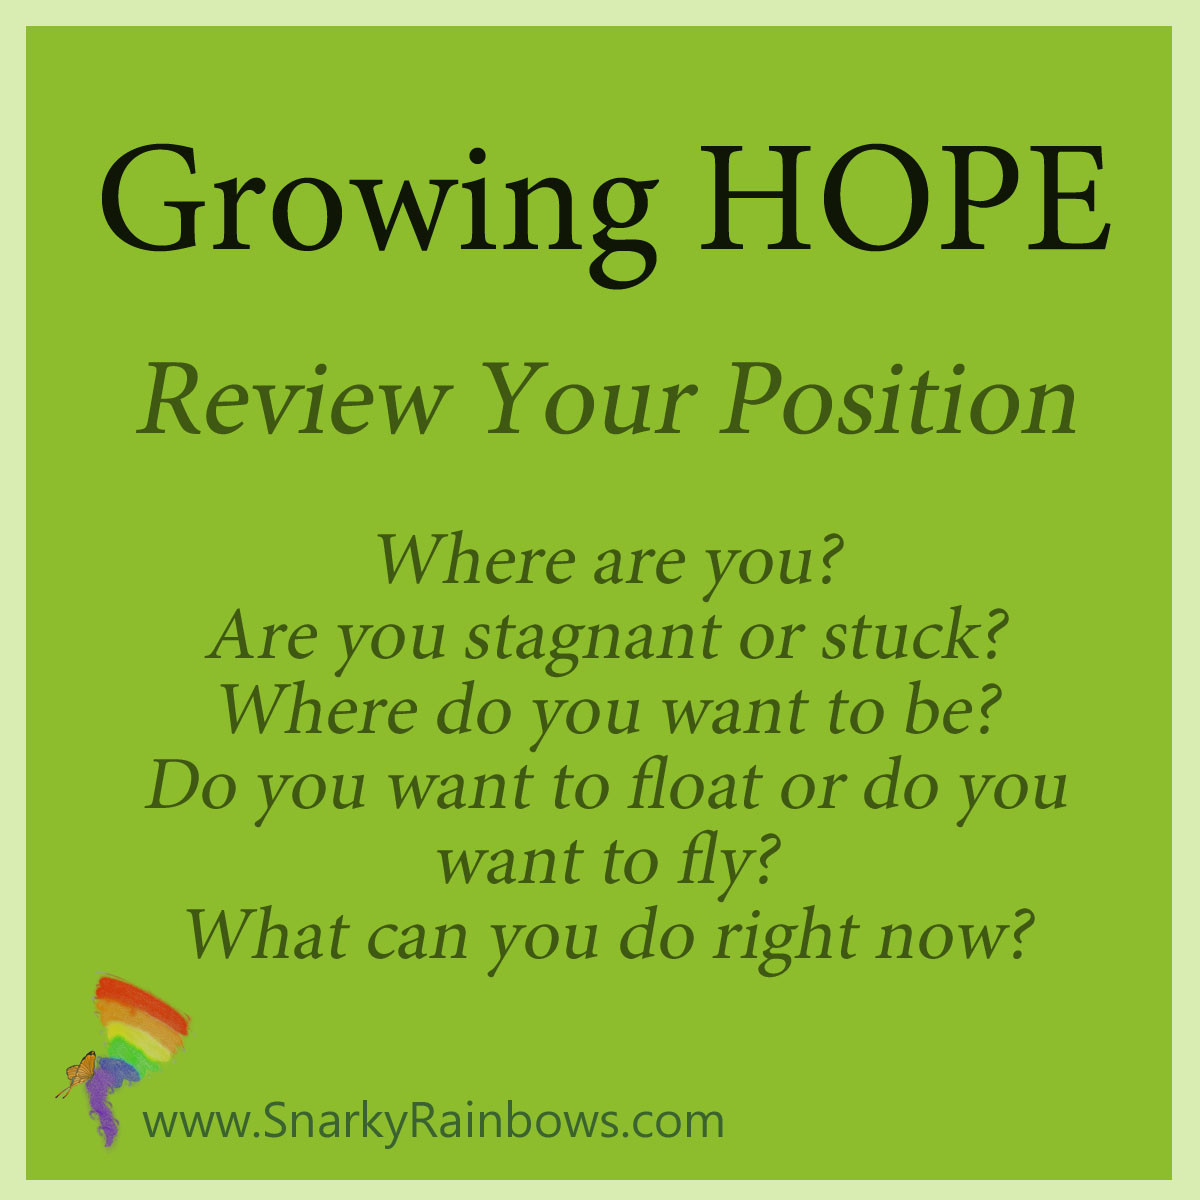 #GrowingHOPE - review your position